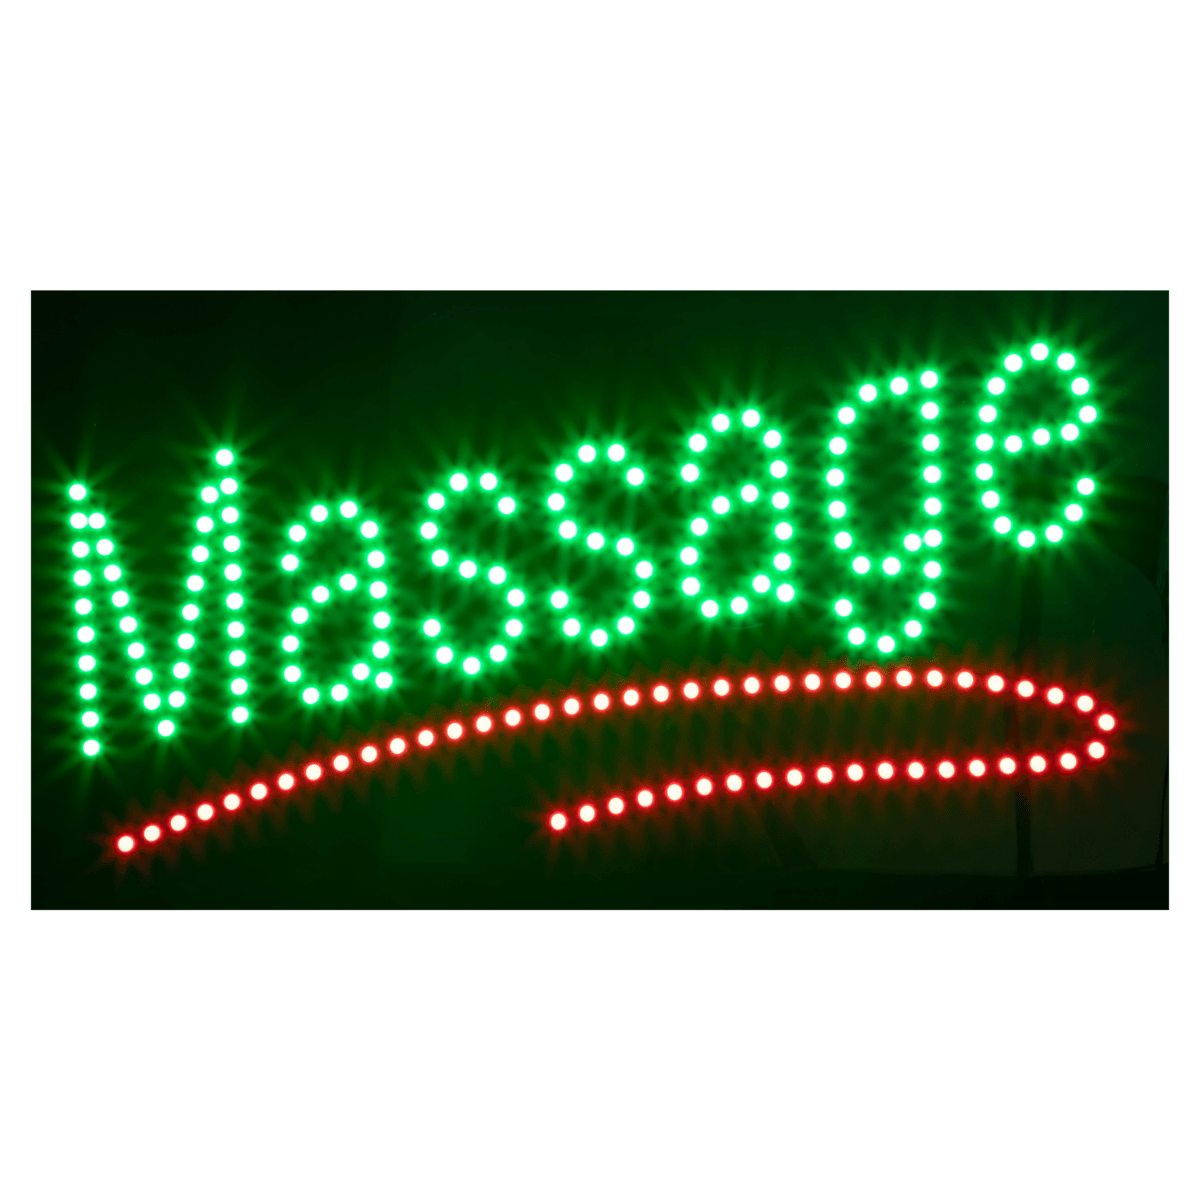 LED Store Signs - W.S. Industries, Inc.